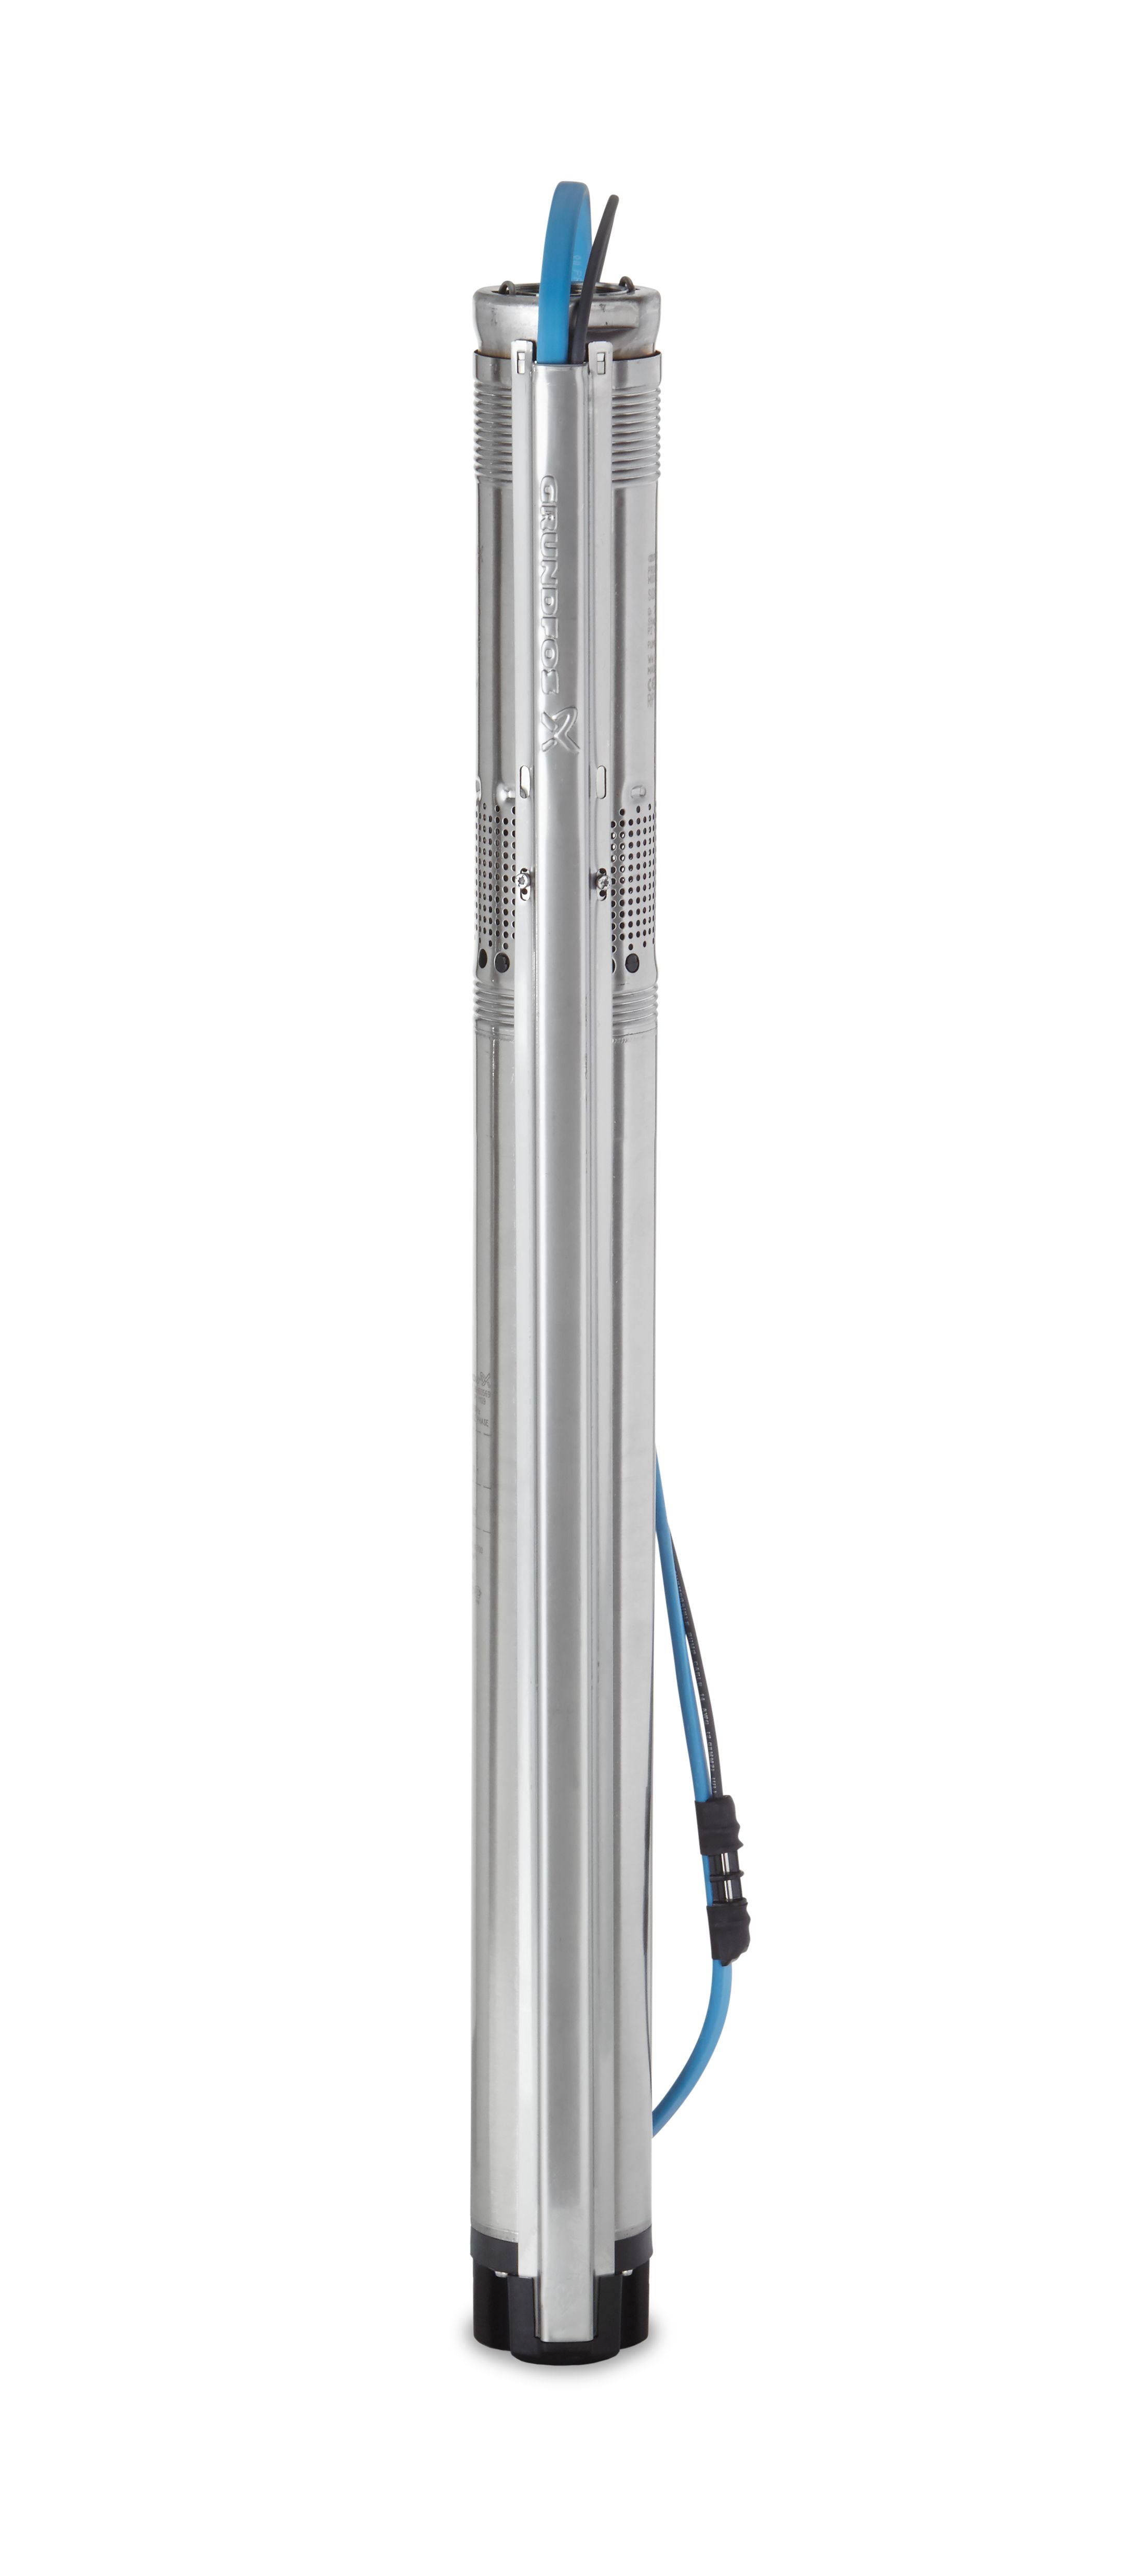 SQFlex Large is designed to meet the rising demand for solar energy pumps while withstanding the diverse weather conditions spanning the region.